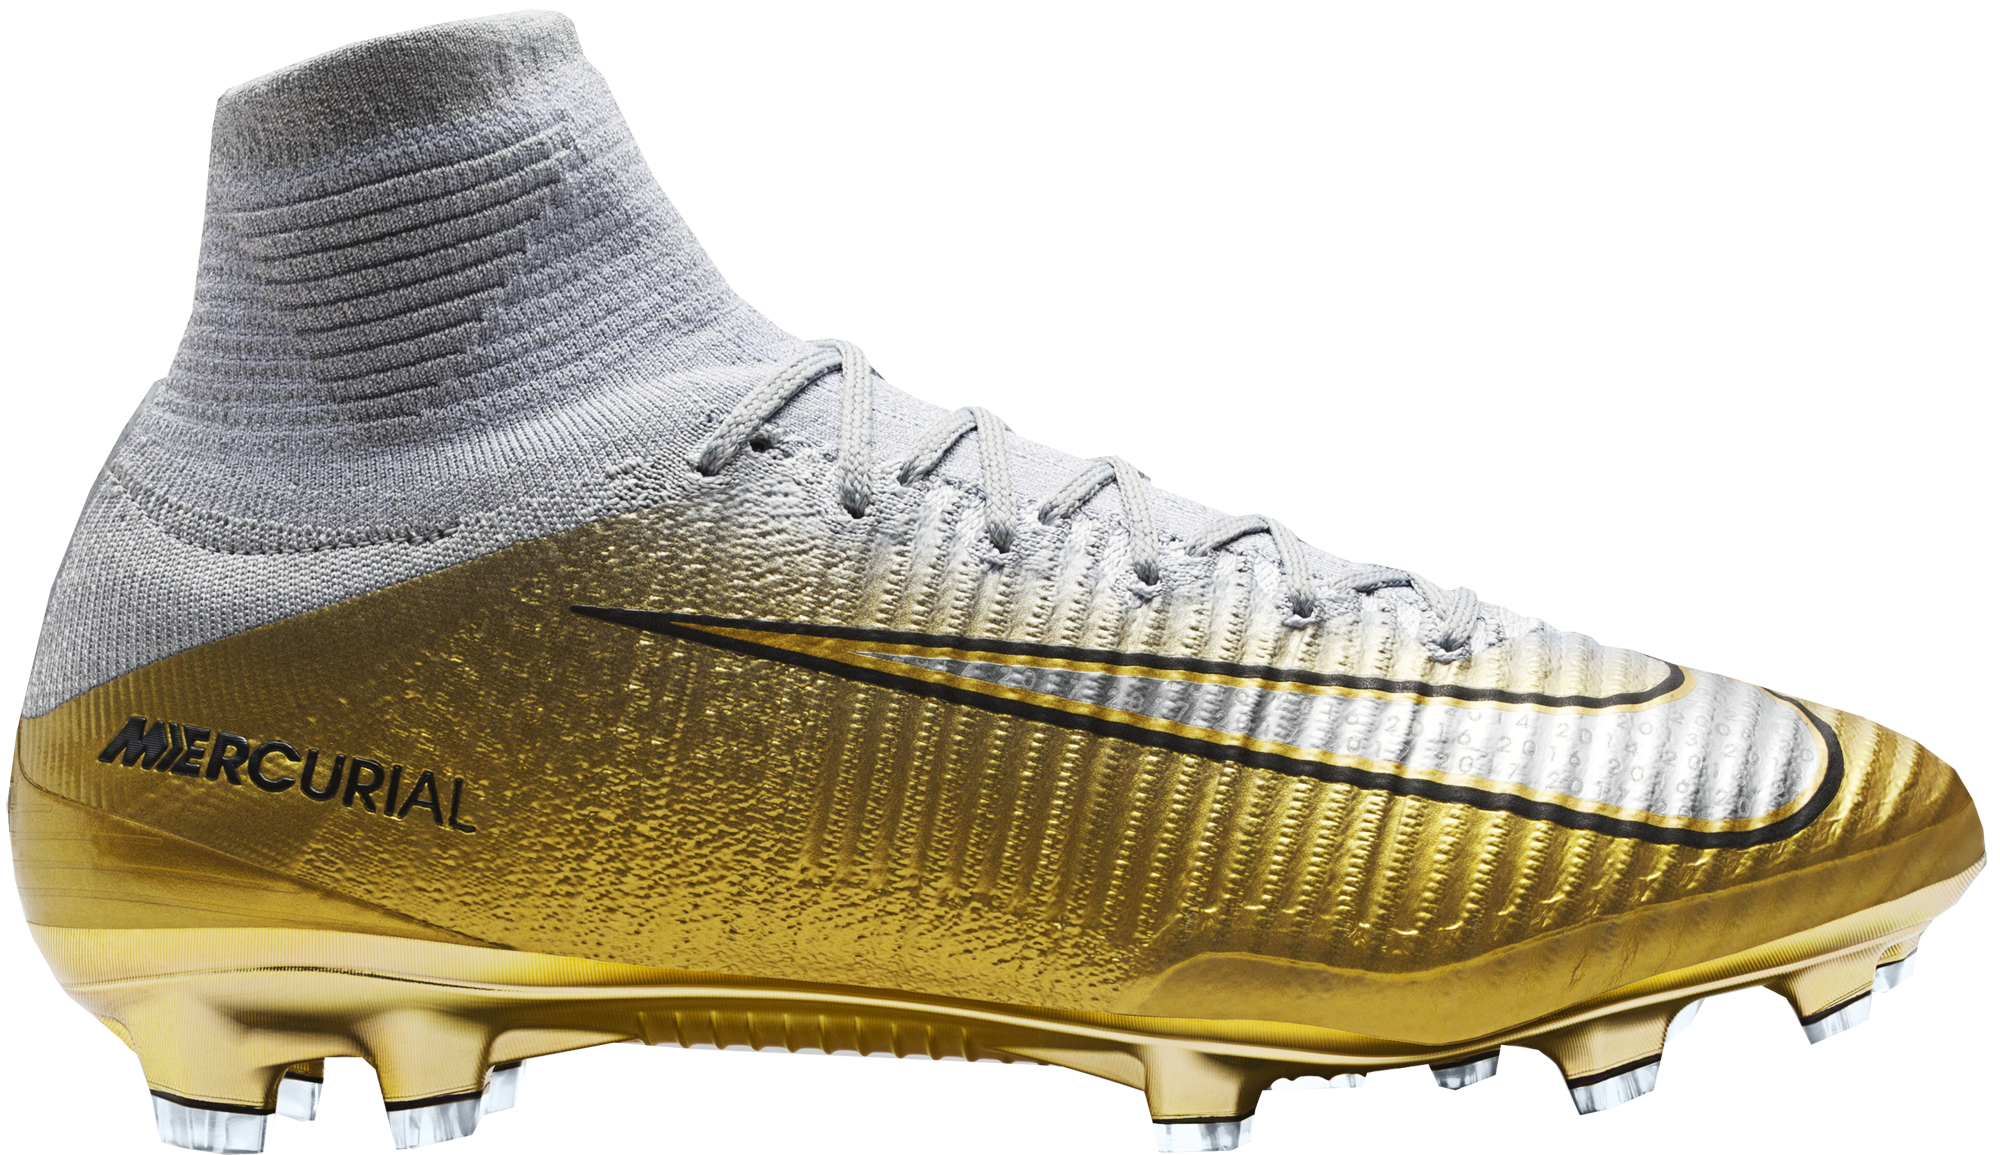 mercurial superfly cr7